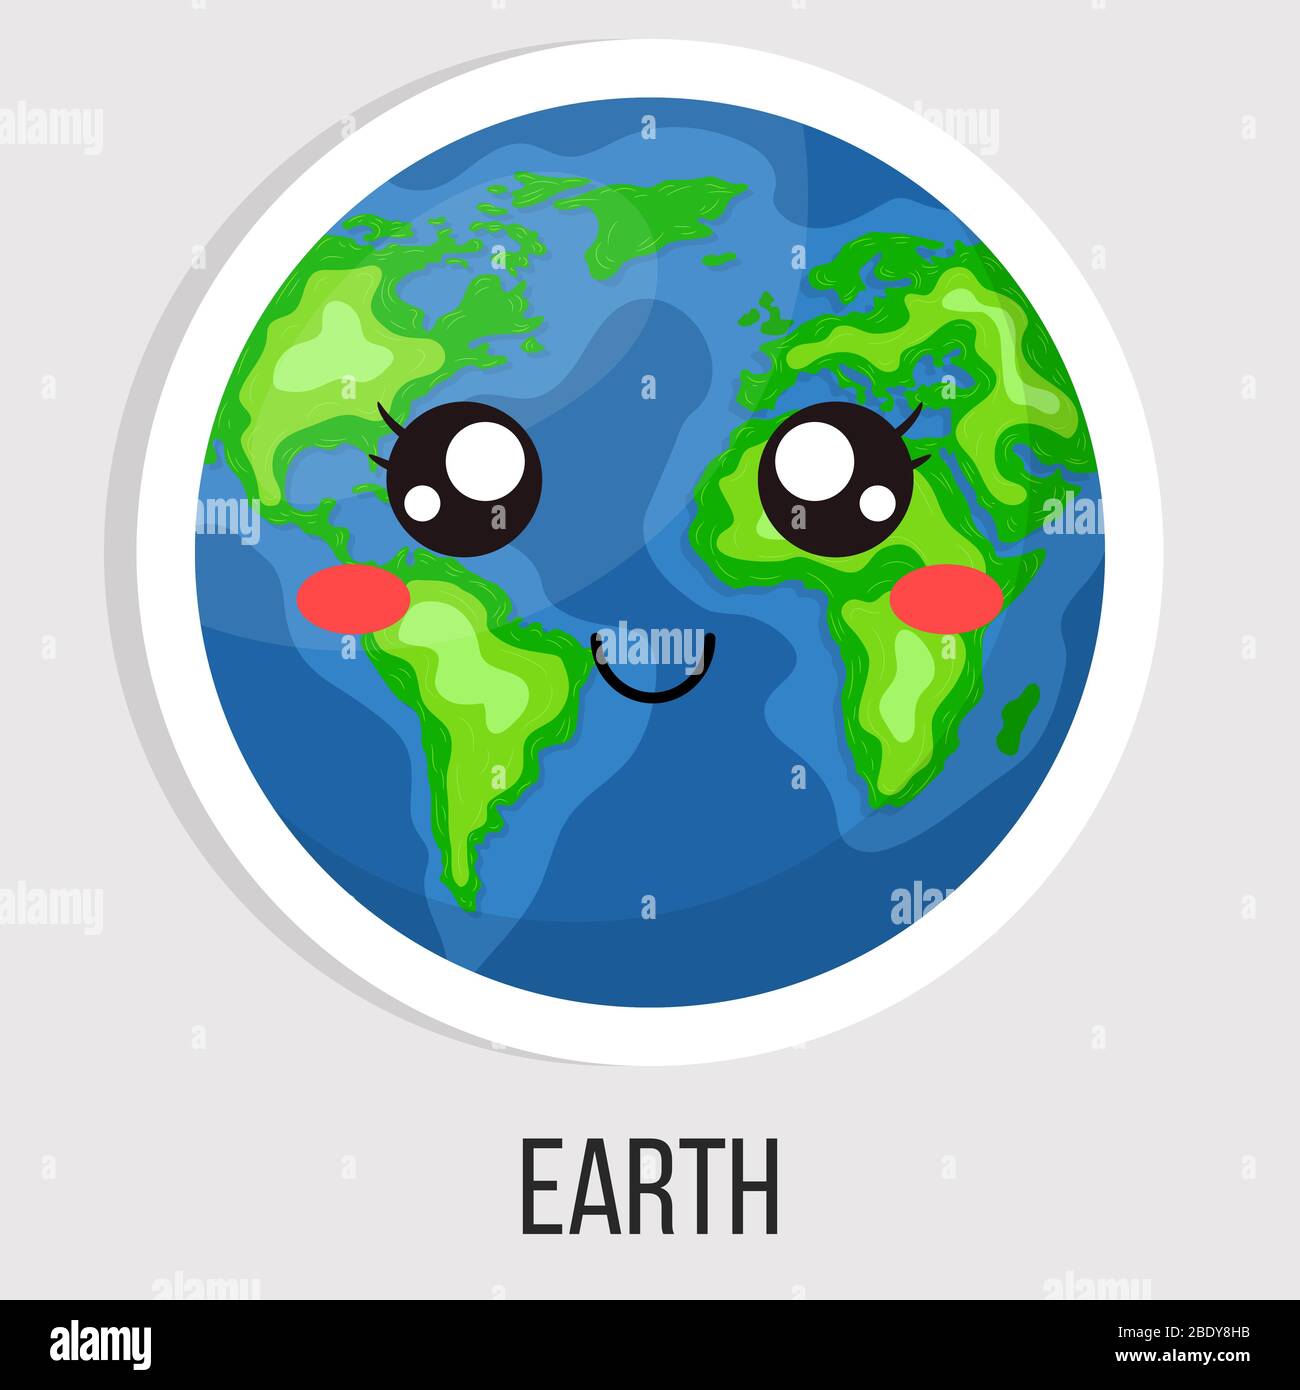 Cartoon cute earth planet isolated on white background. Planet of solar system. Cartoon style vector illustration for any design. Stock Vector